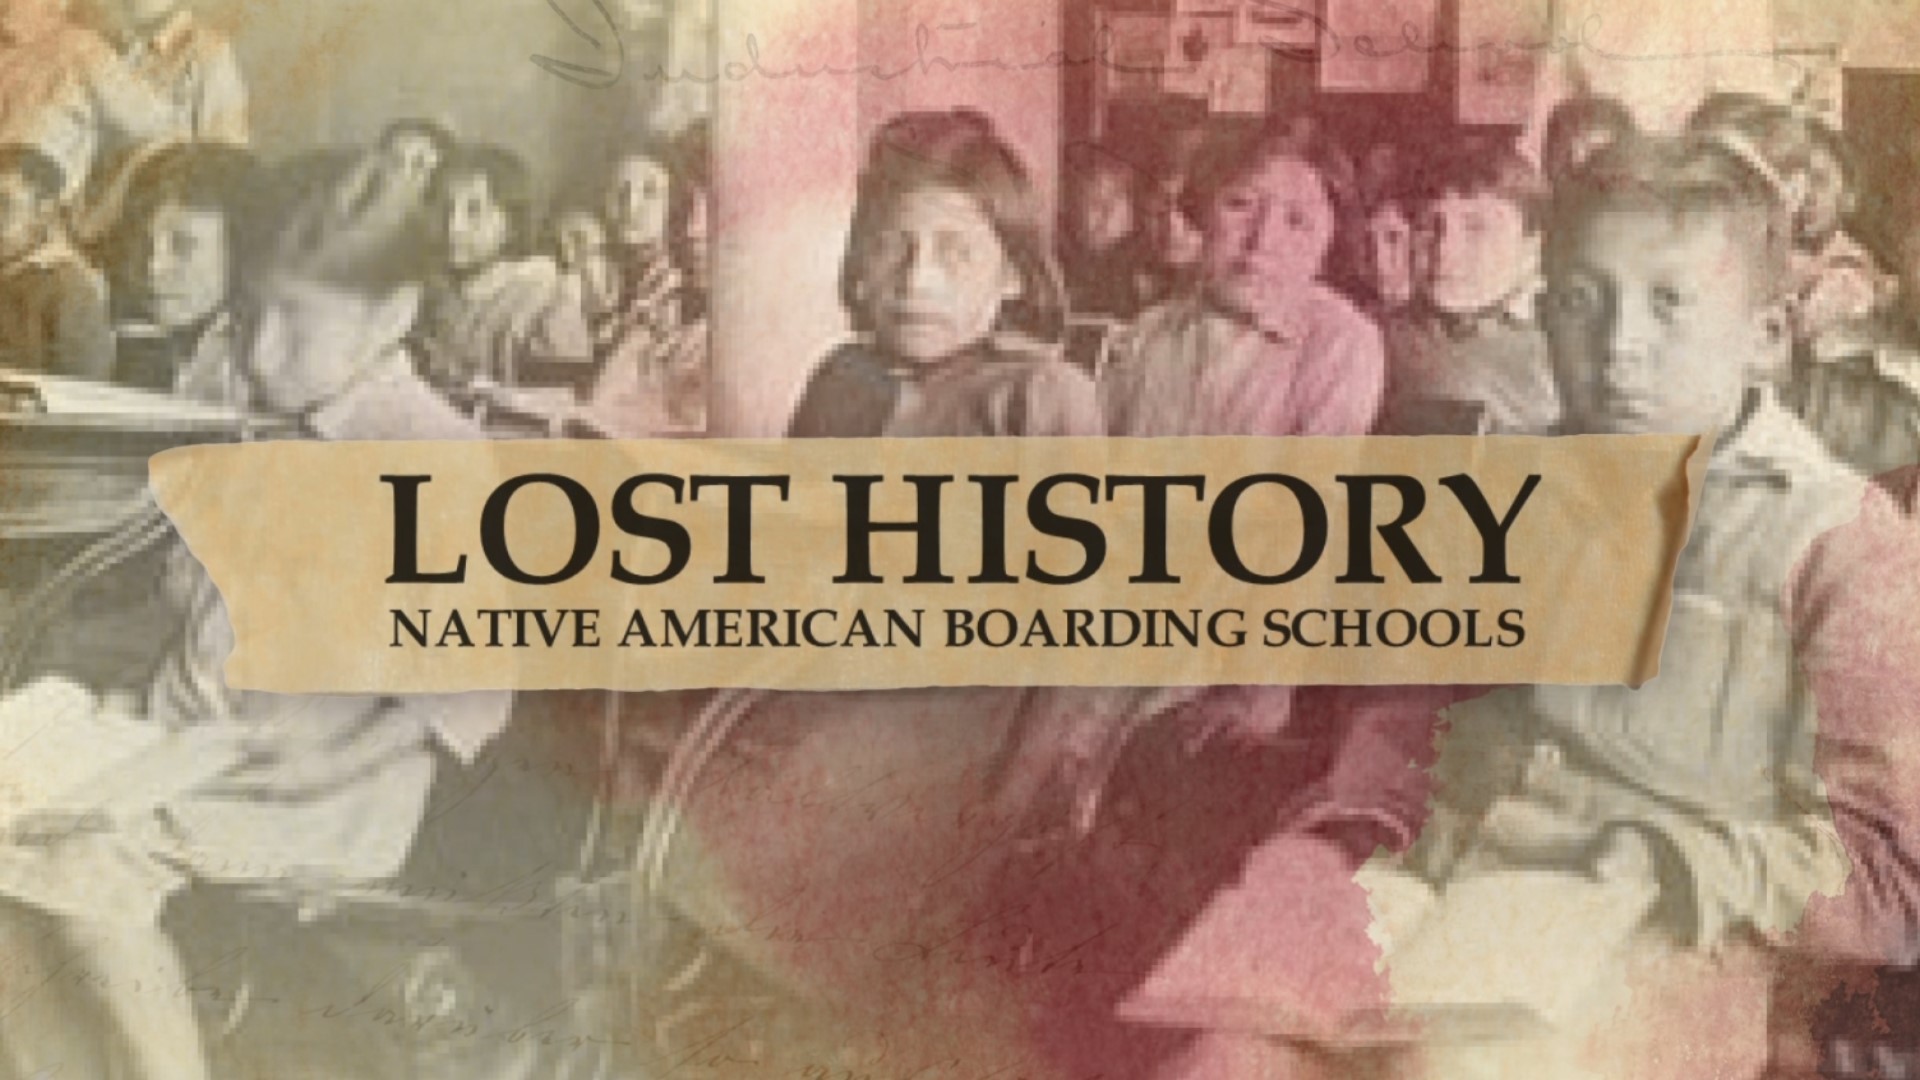 Two years ago, more than 200 bodies of children were found at the site of an Indigenous boarding school in Canada. Learn more about their "Lost History."